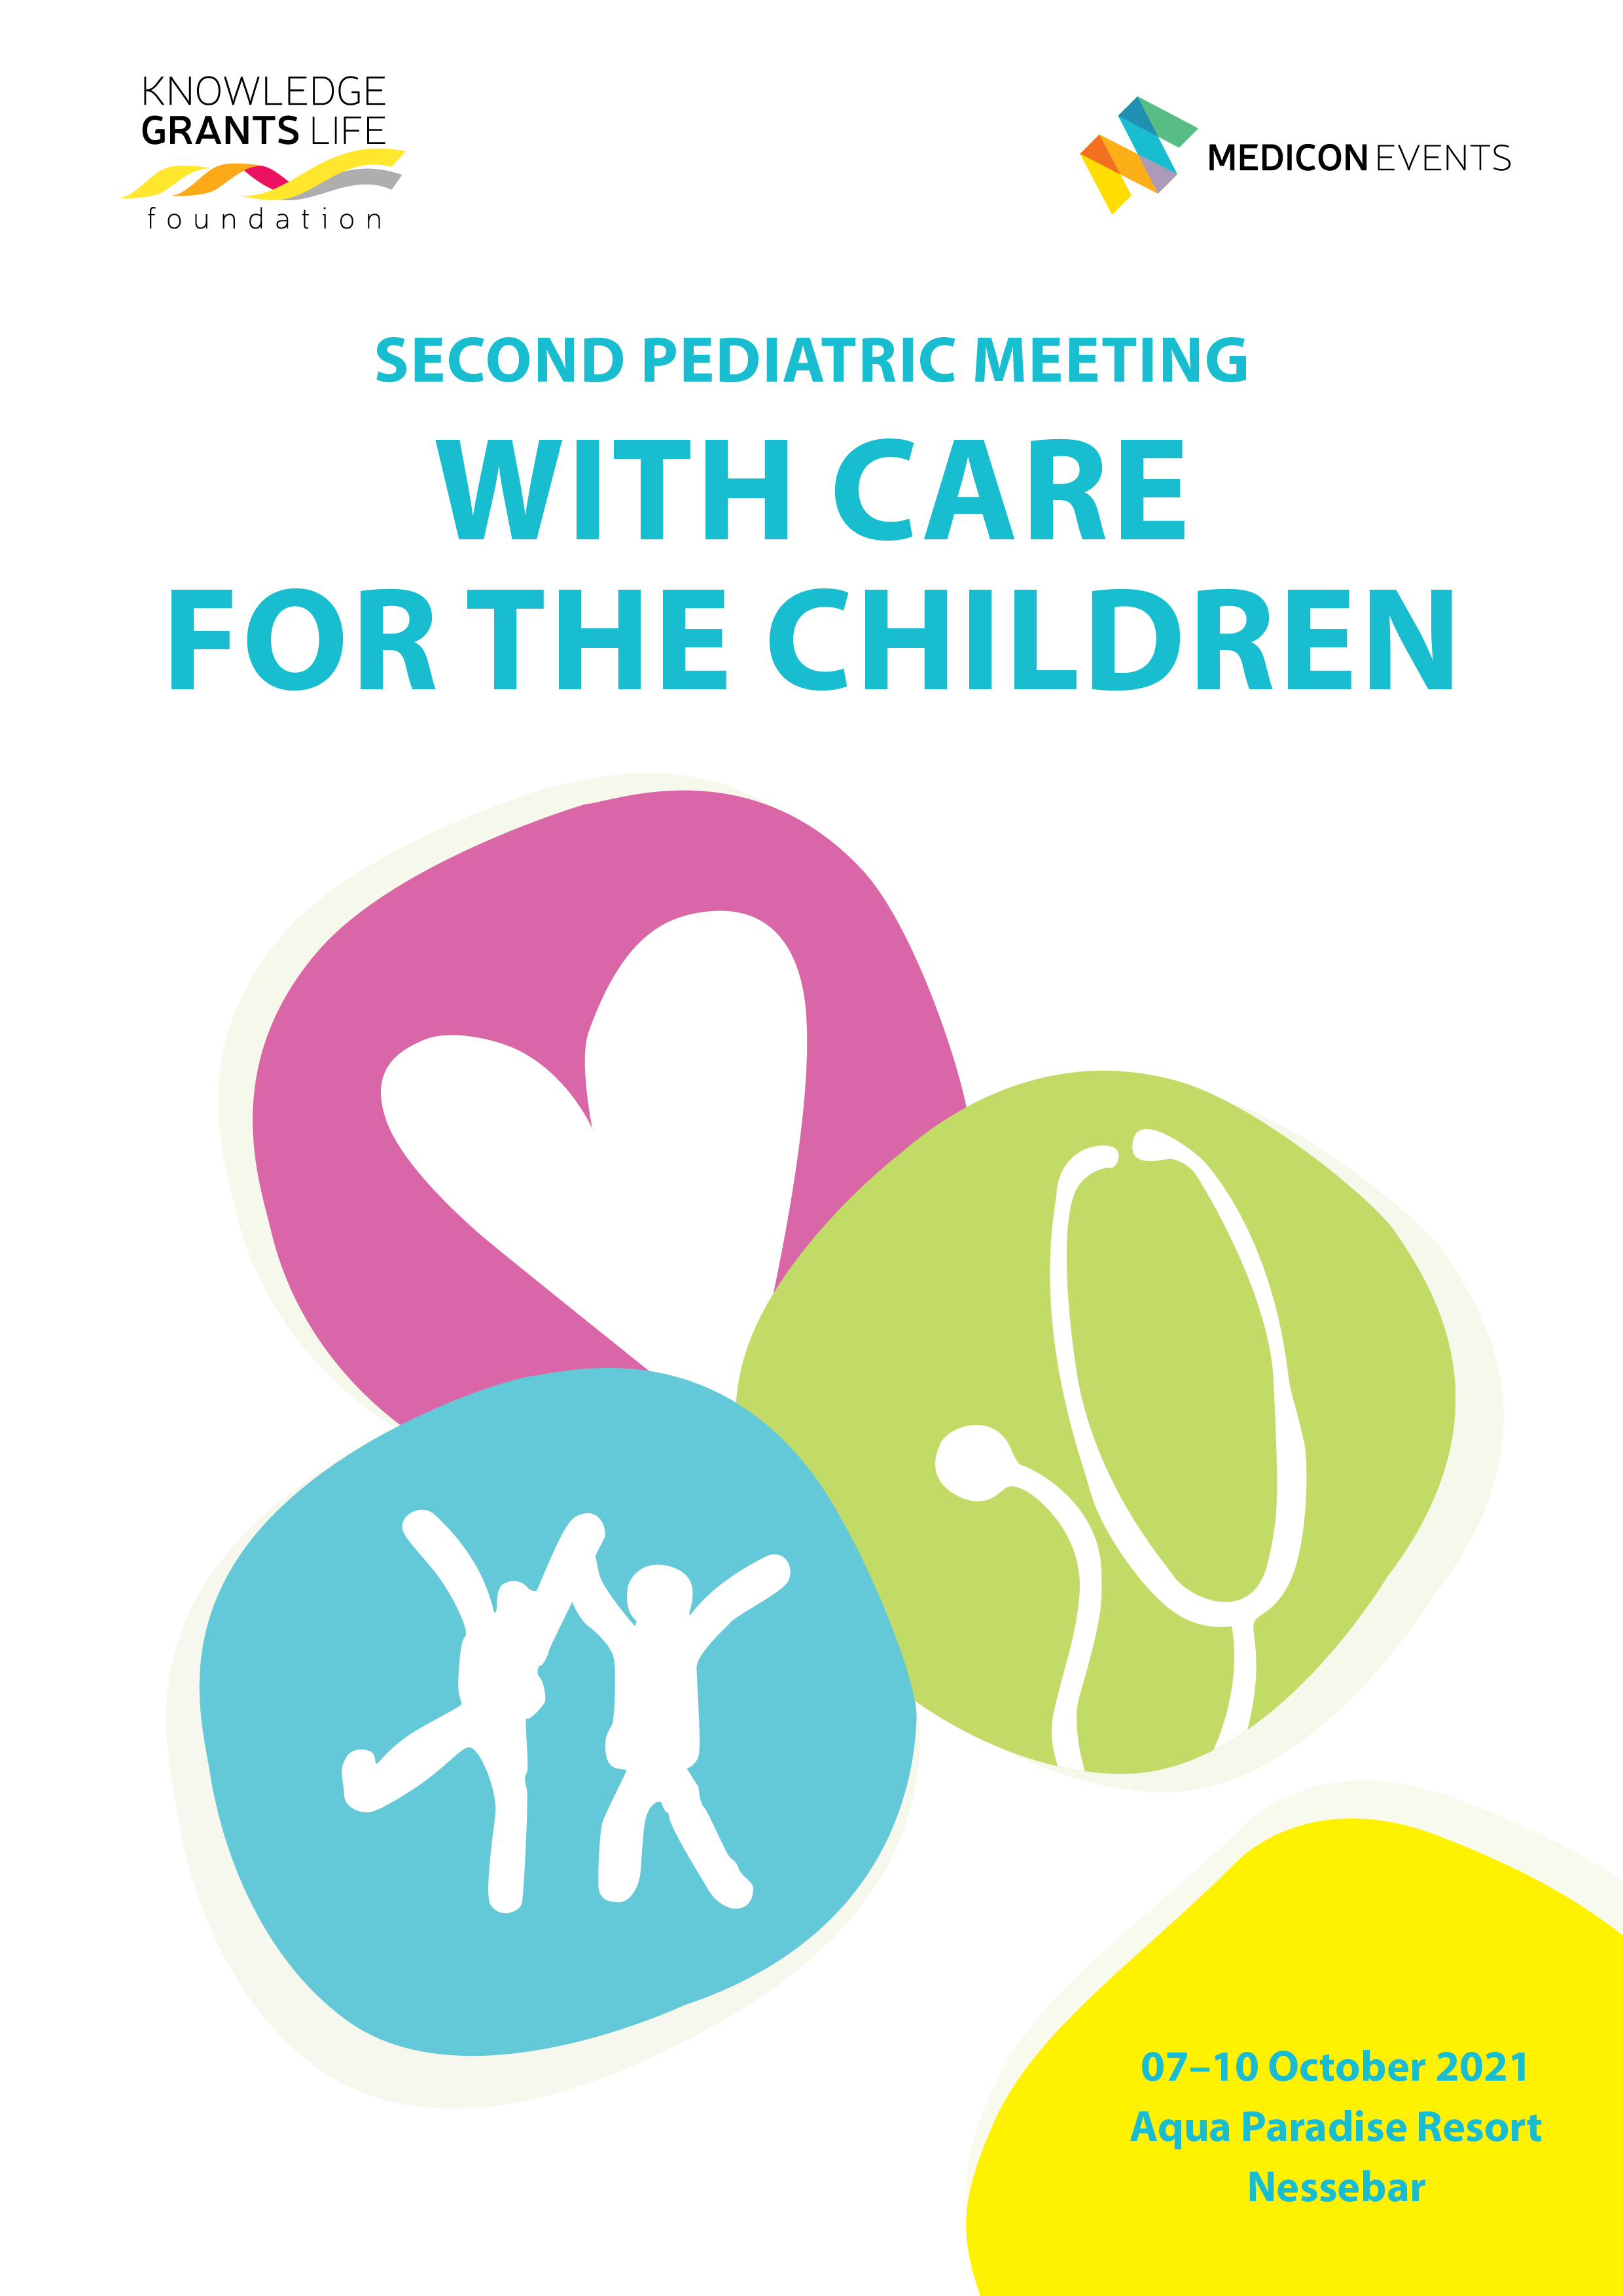 Second Pediatric Meeting "With care for the children"